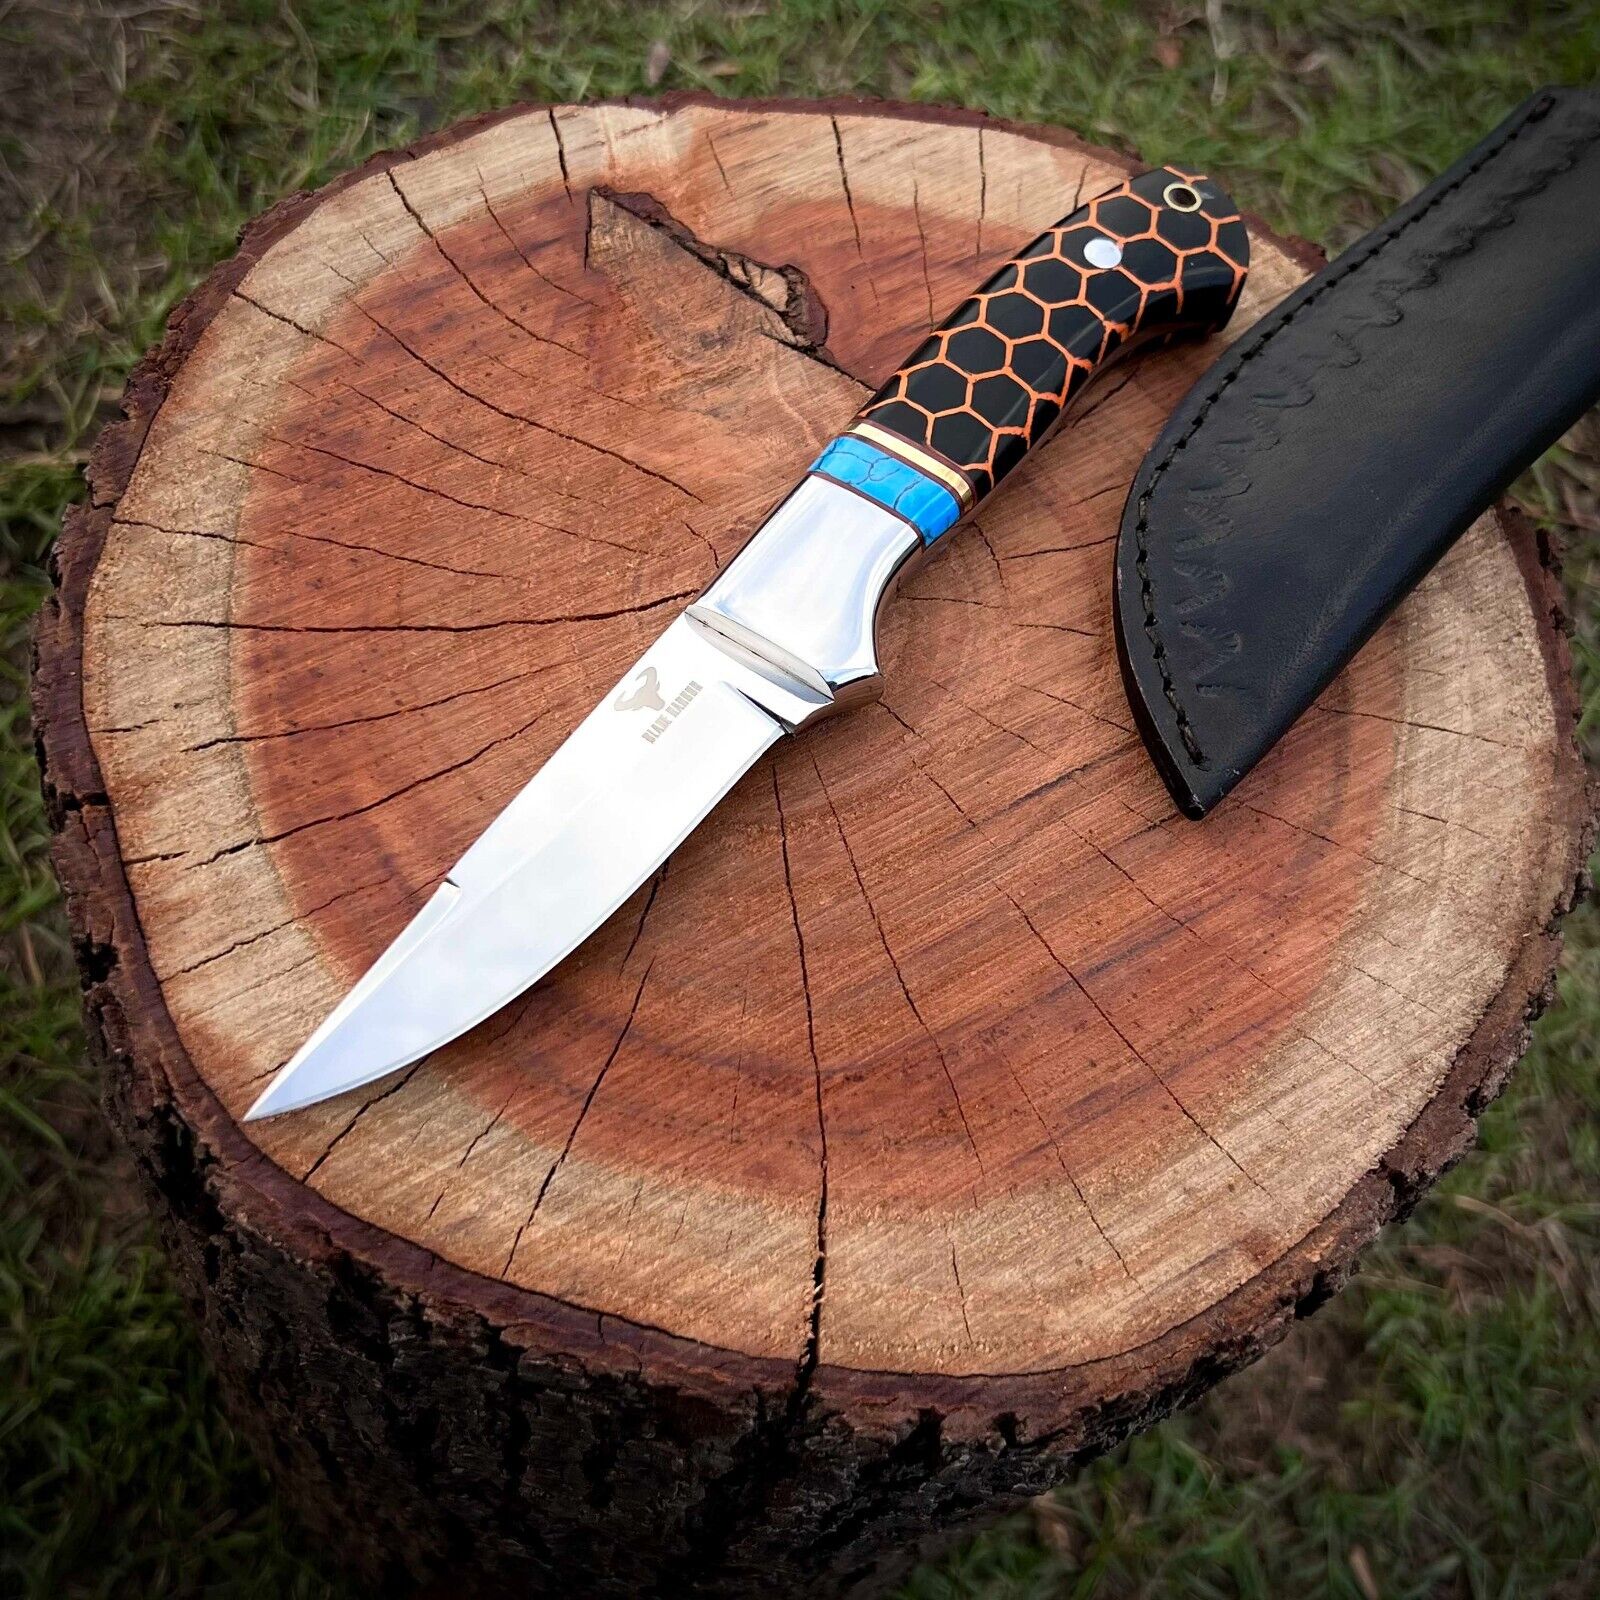 BLADE HARBOR CUSTOM HAND MADE HUNTING STAINLESS KNIFE CAMPING OUTDOOR MILITARY